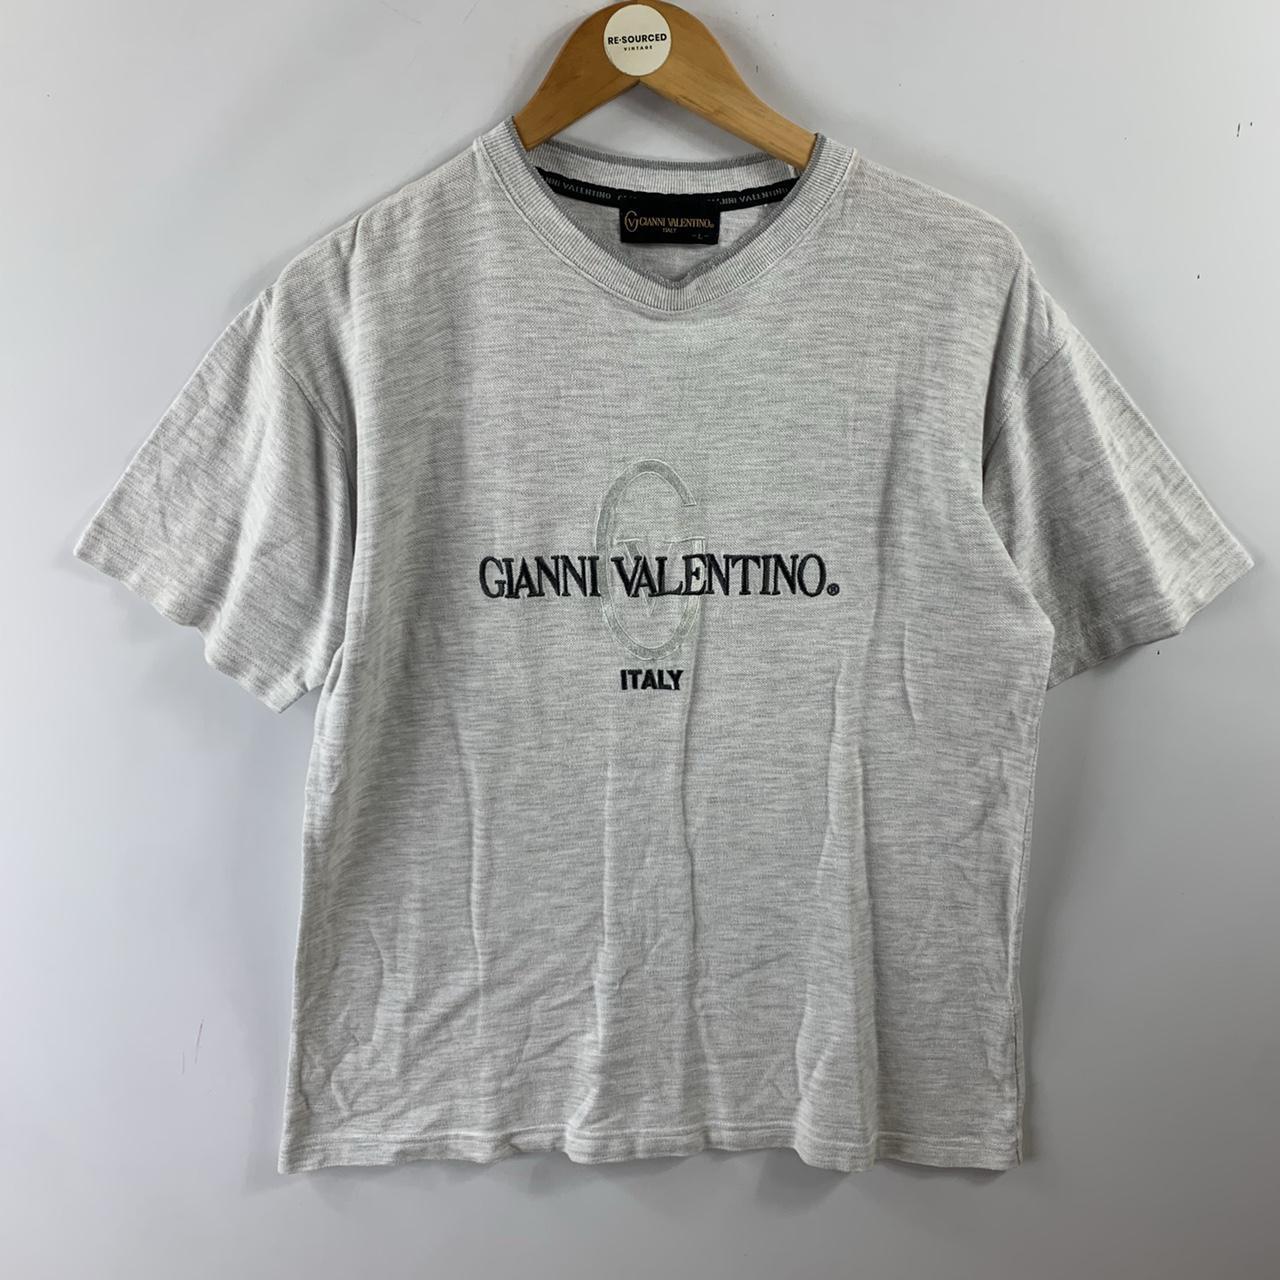 Product Image 2 - Vintage Gianni Valentino T-shirt with